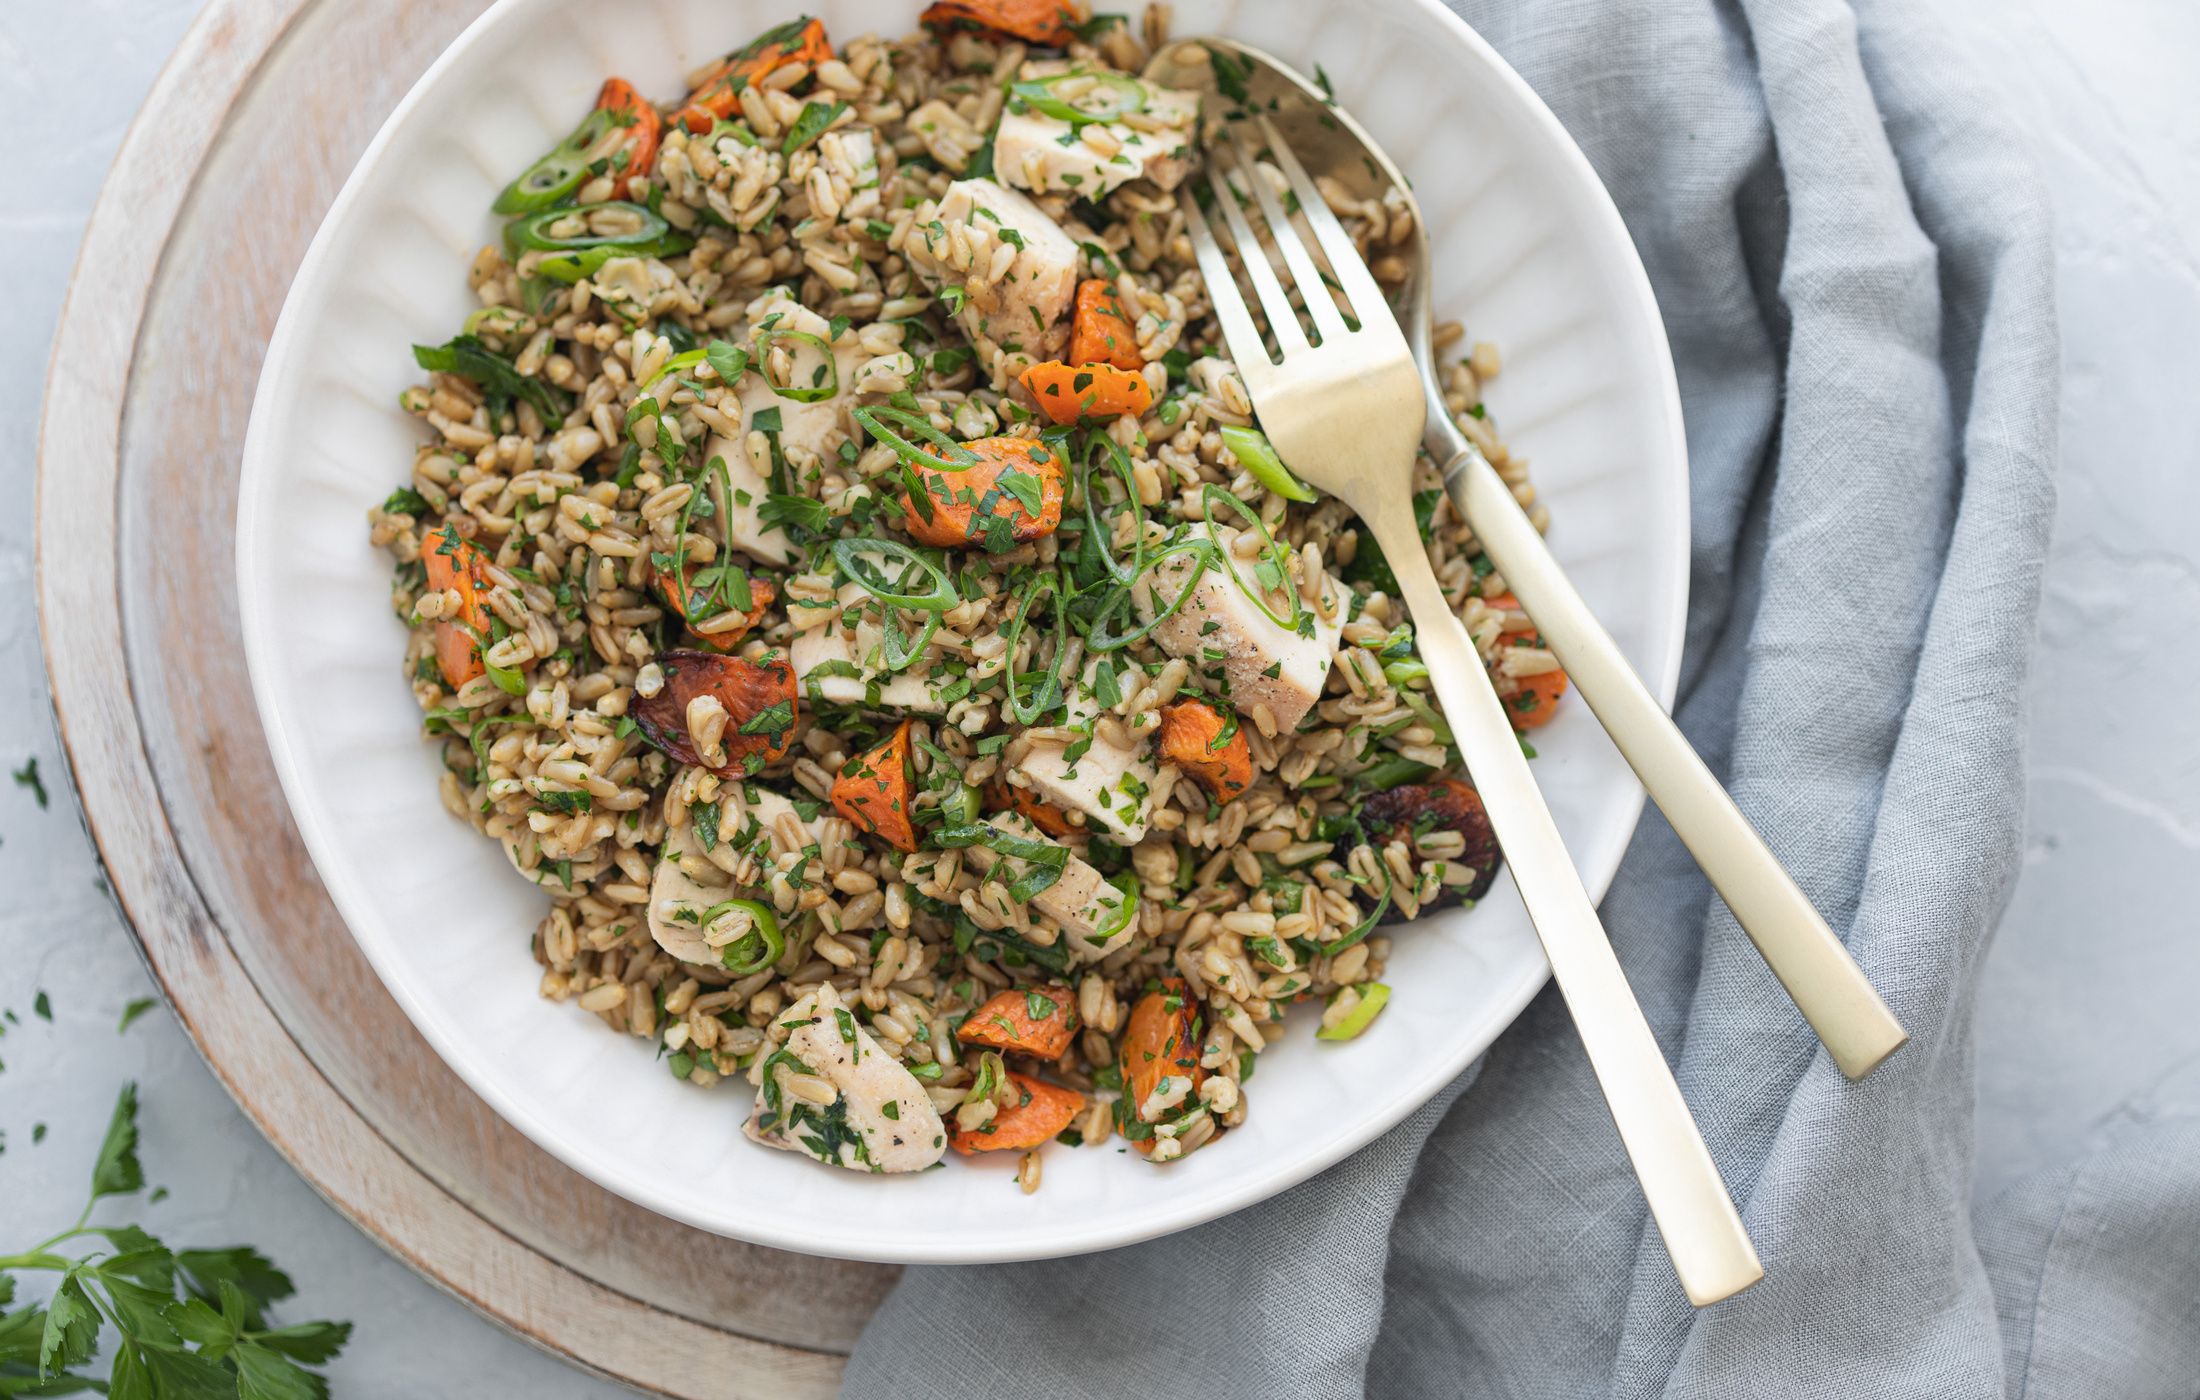 Oat Groat Salad with Chicken and Roasted Carrots